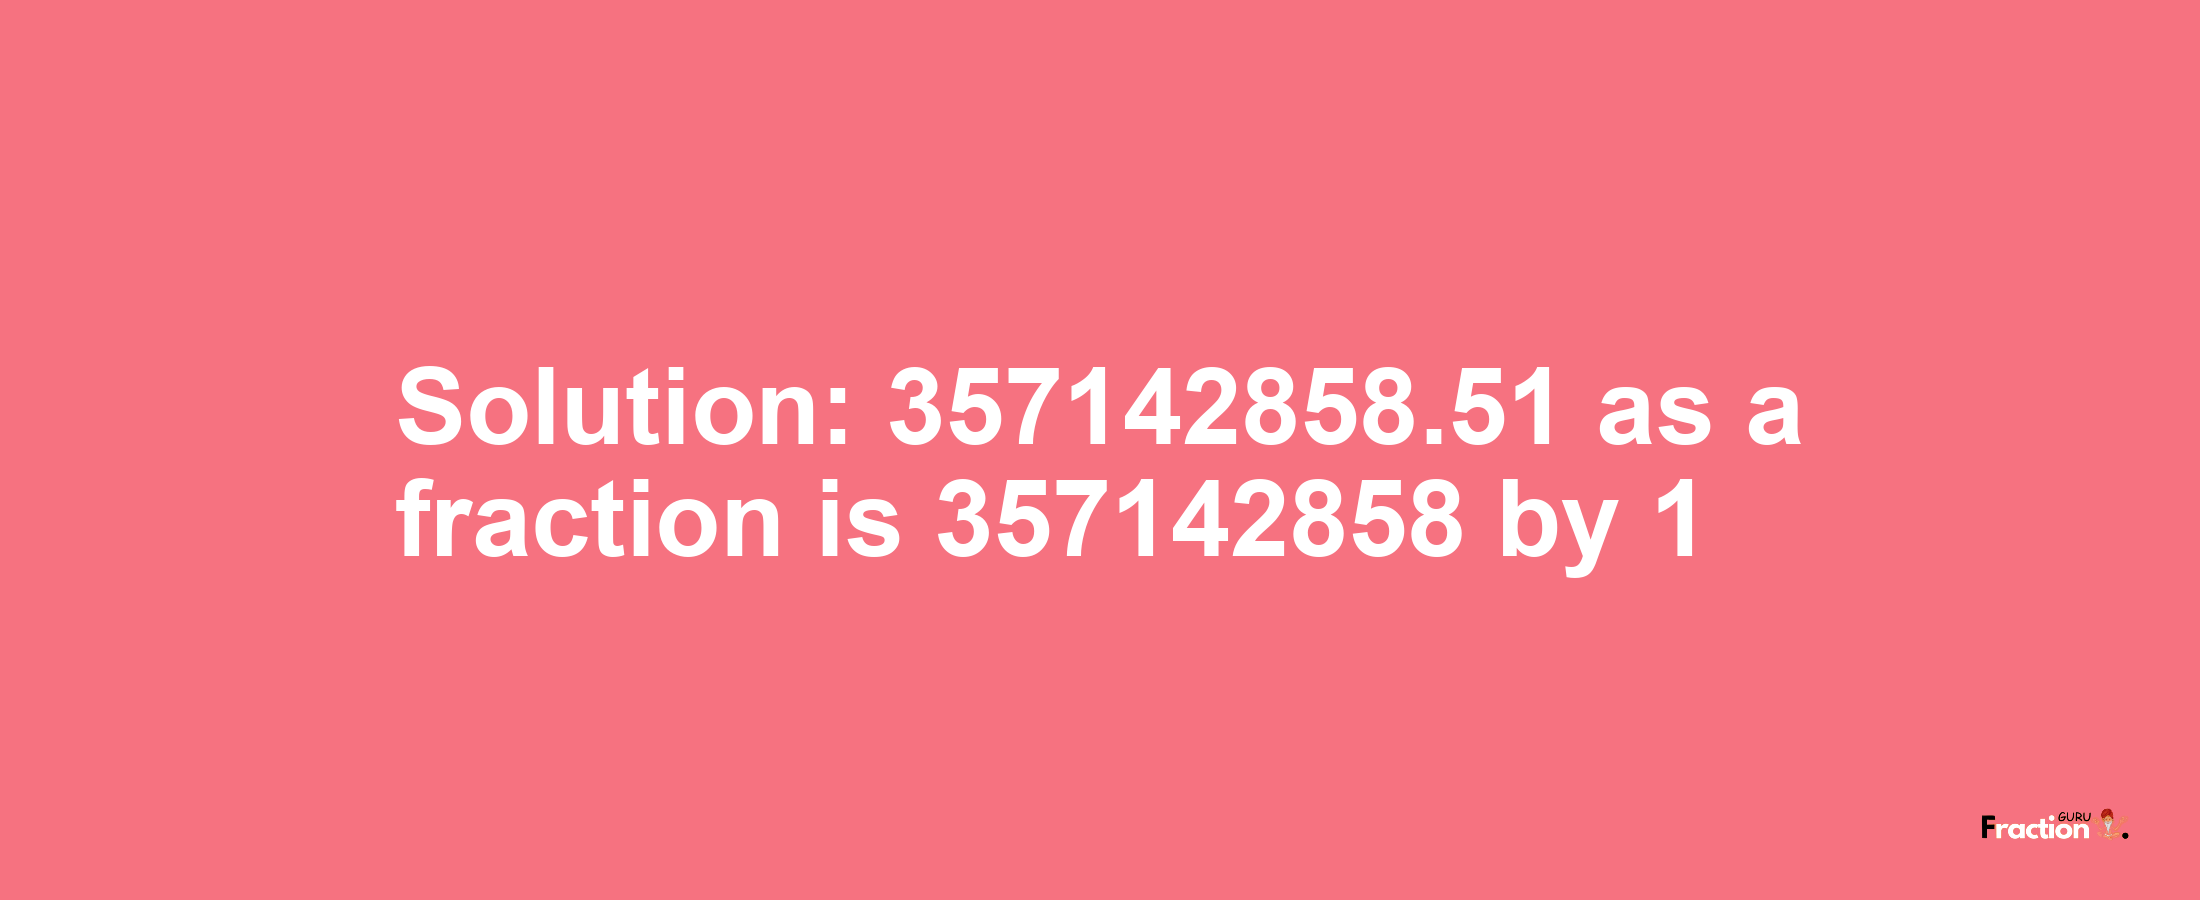 Solution:357142858.51 as a fraction is 357142858/1